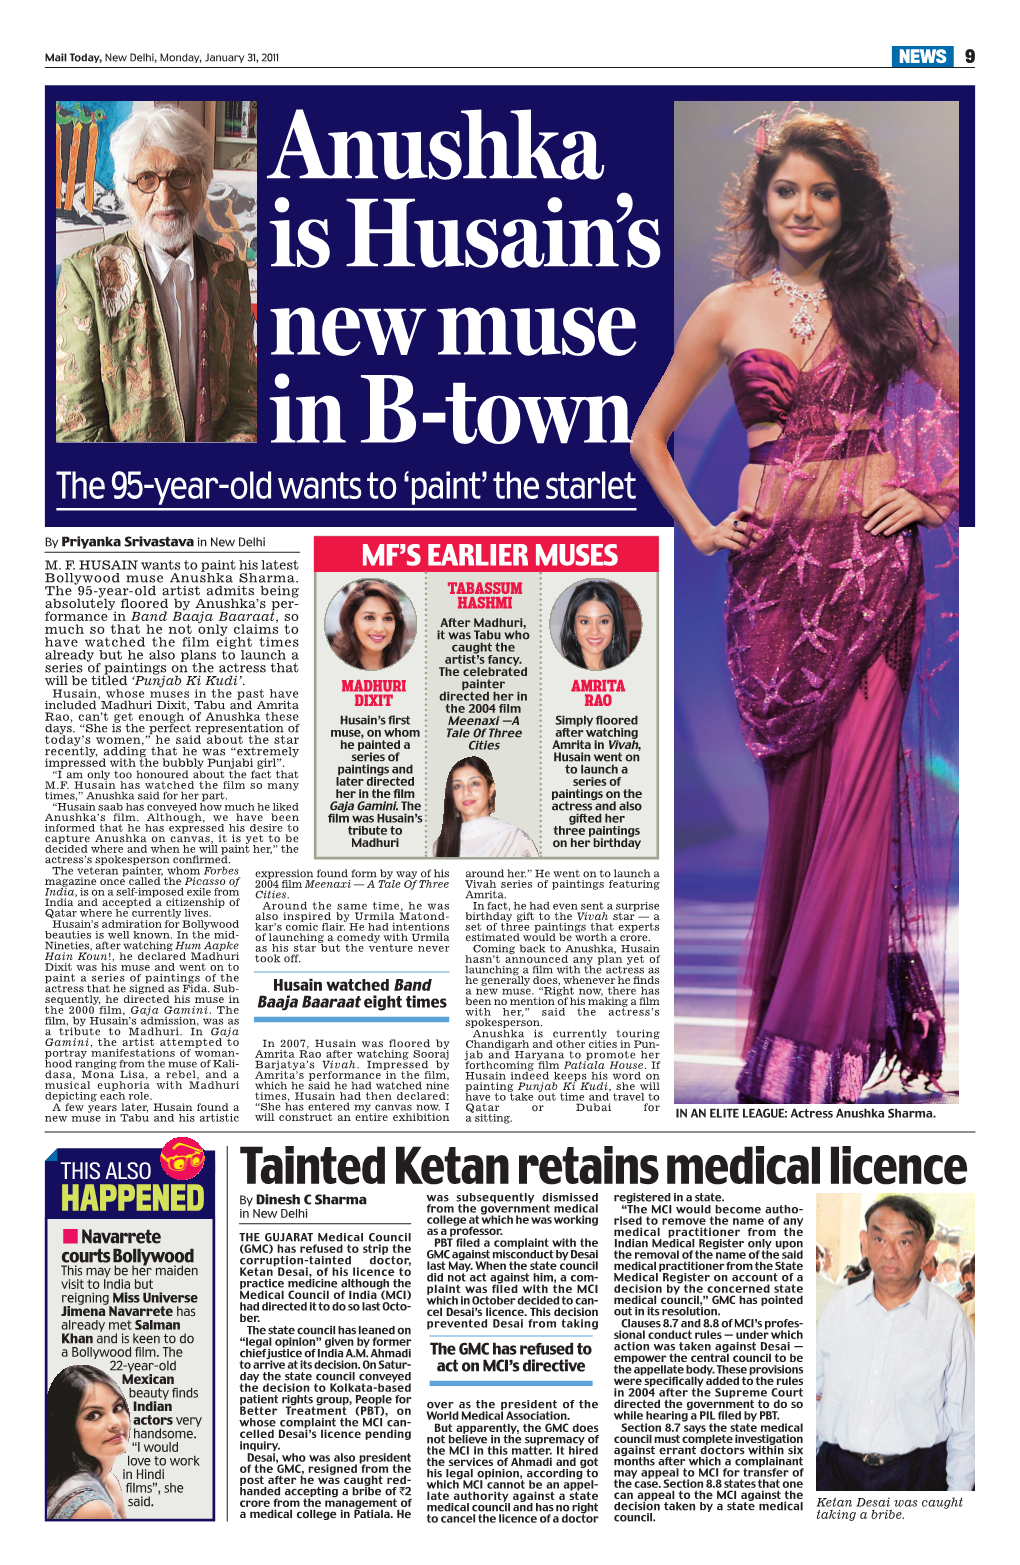 Mail Today, New Delhi, Monday, January 31, 2011 NEWS 9 Anushka Is Husain’S New Muse in B-Town the 95-Year-Old Wants to ‘Paint’ the Starlet